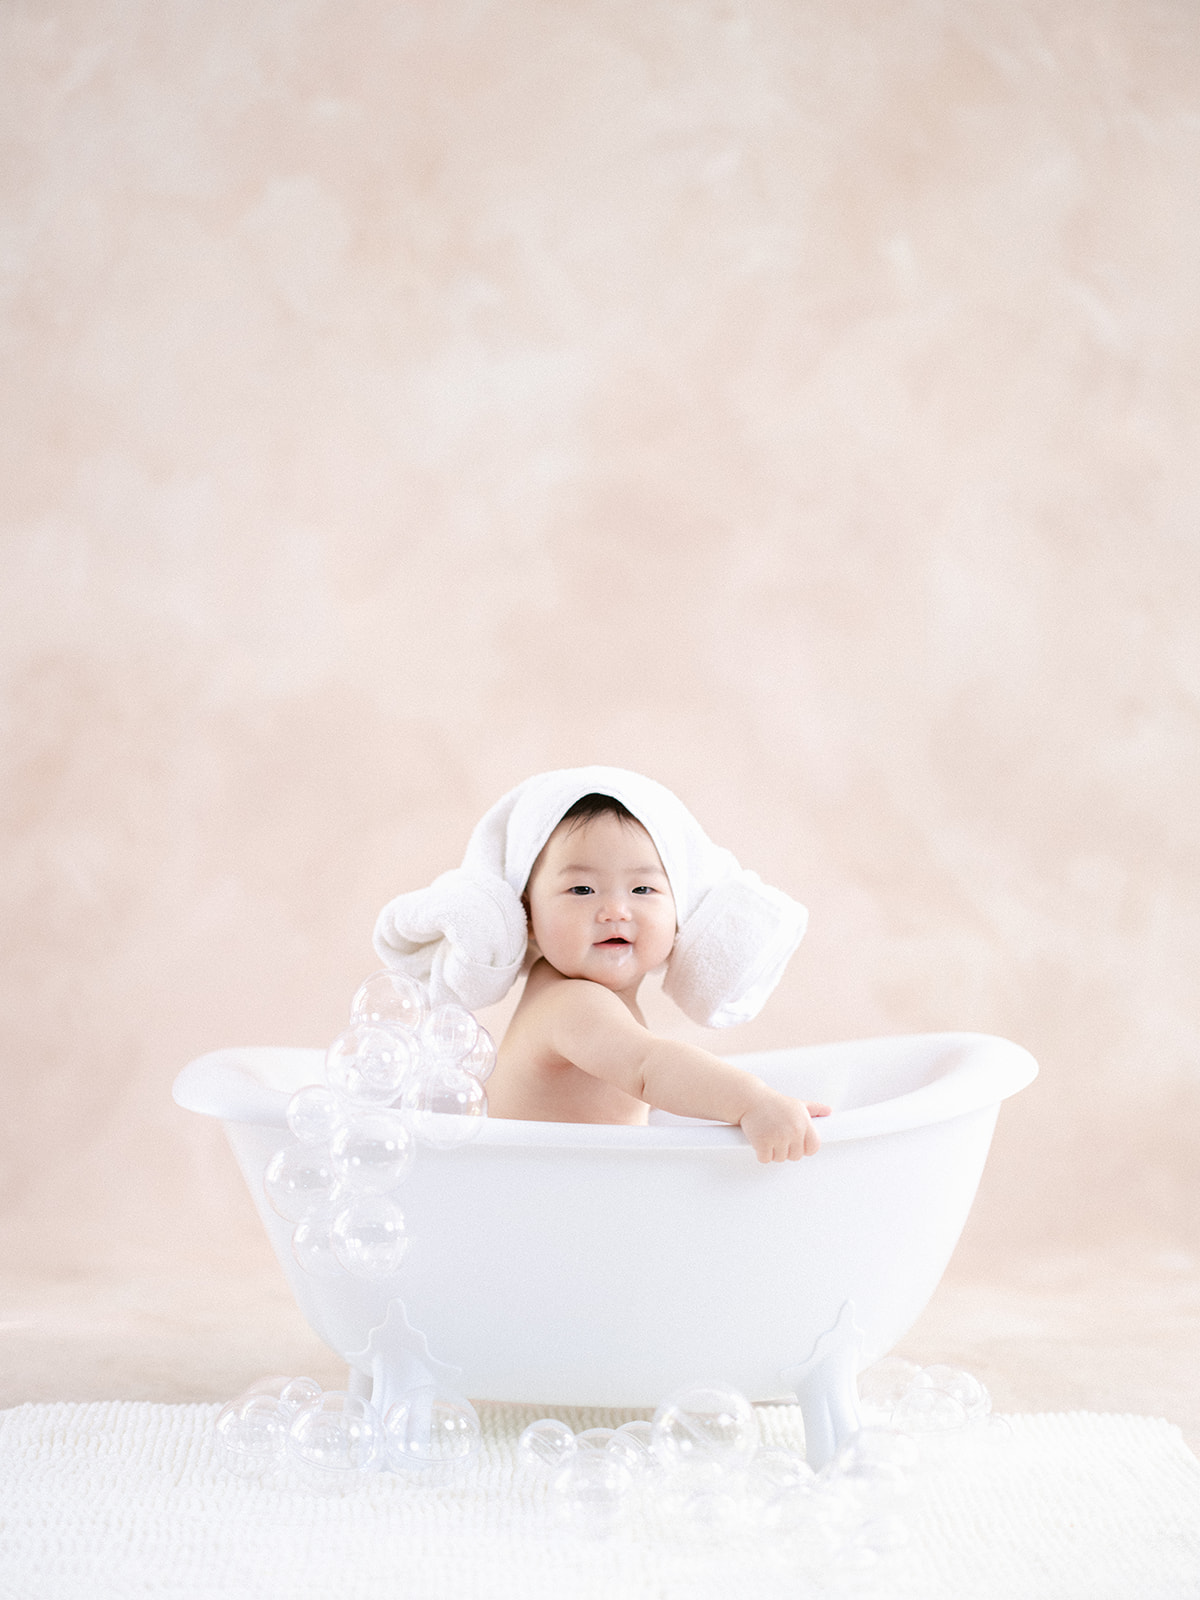 spa day with cute asian baby sitting in a baby-sized clawfoot tub with head wrapped in a towel